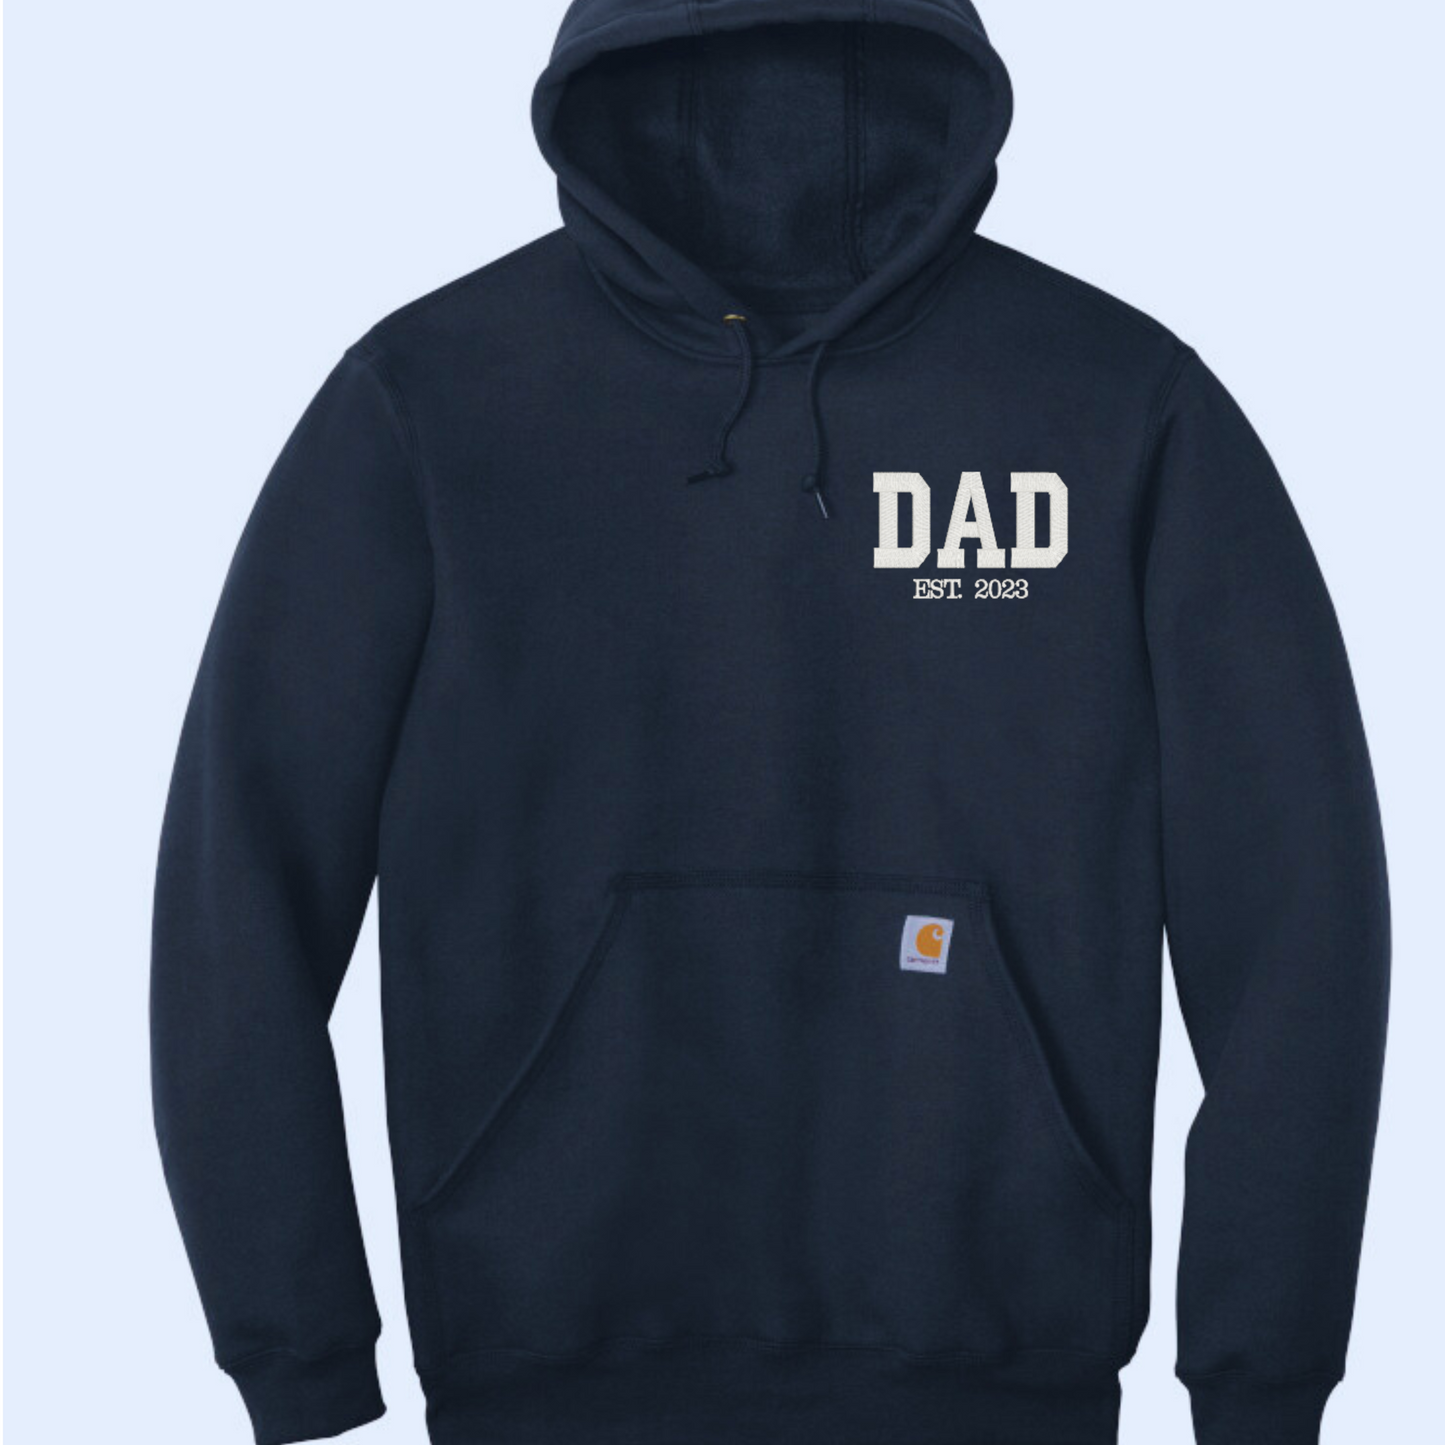 Carhartt DAD hoodie Embroidered, with Initials on sleeve